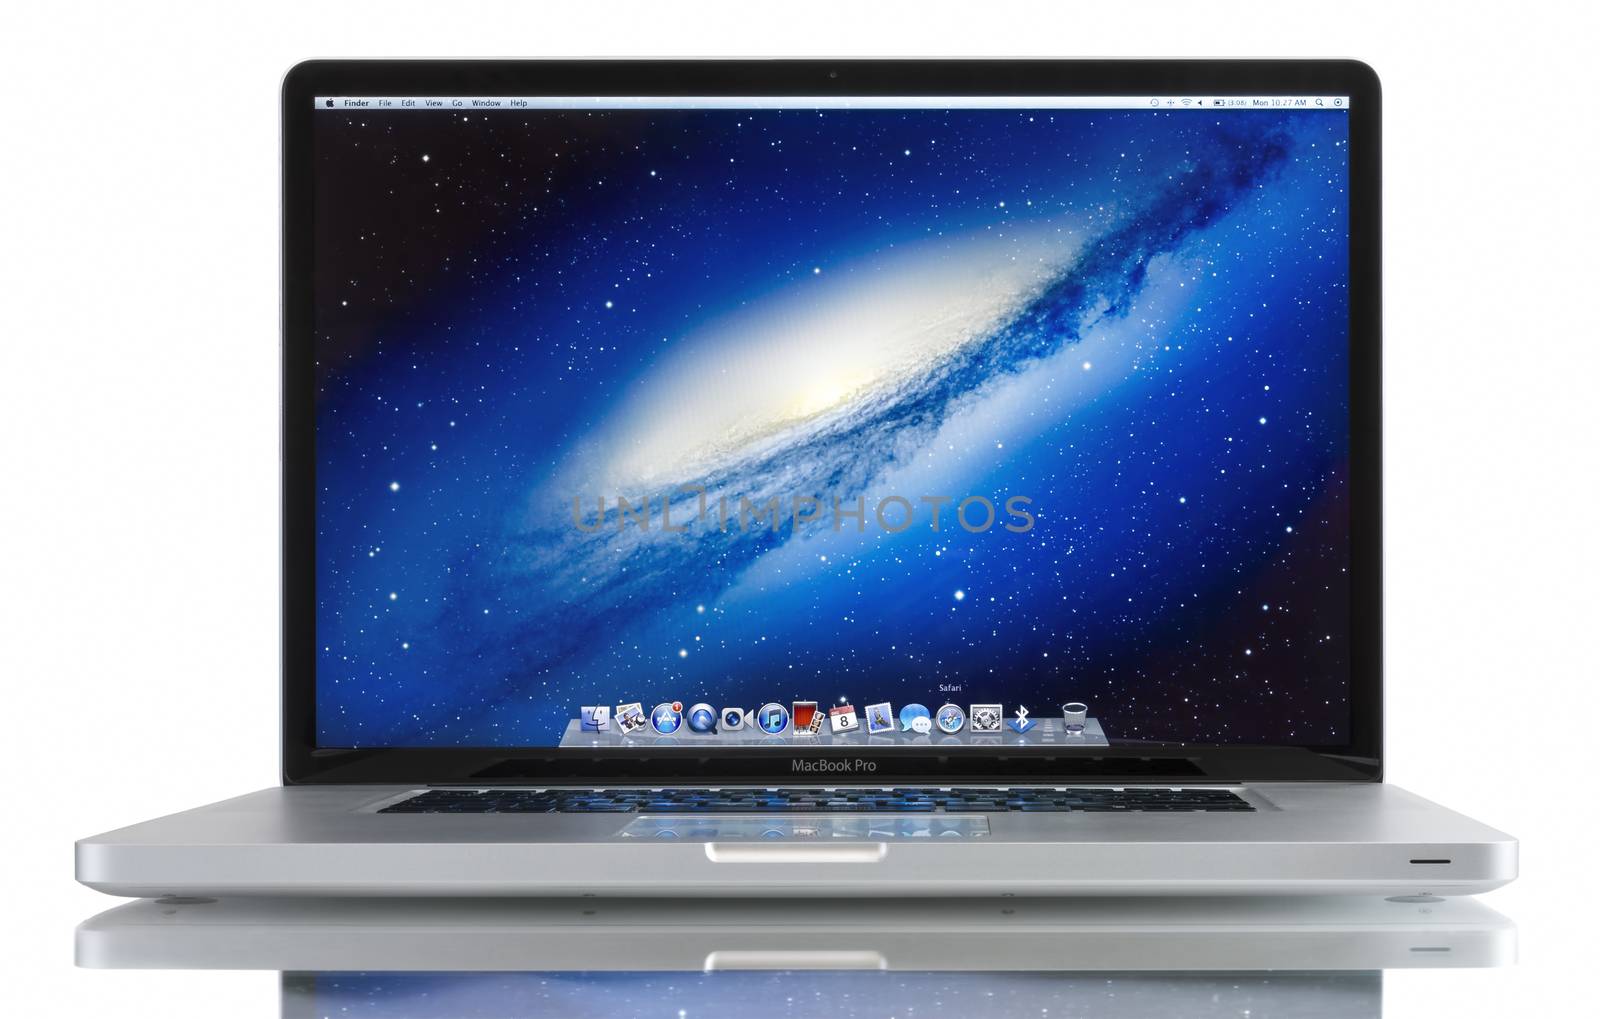 Galati, Romania - December 08, 2014: Studio shot of brand new Apple MacBook Pro laptop computer by Apple Inc. on a white background. This MacBook Pro has a 17-inch antiglare widescreen display and is running the OS X Snow Leopard 10.6.3 operating system.